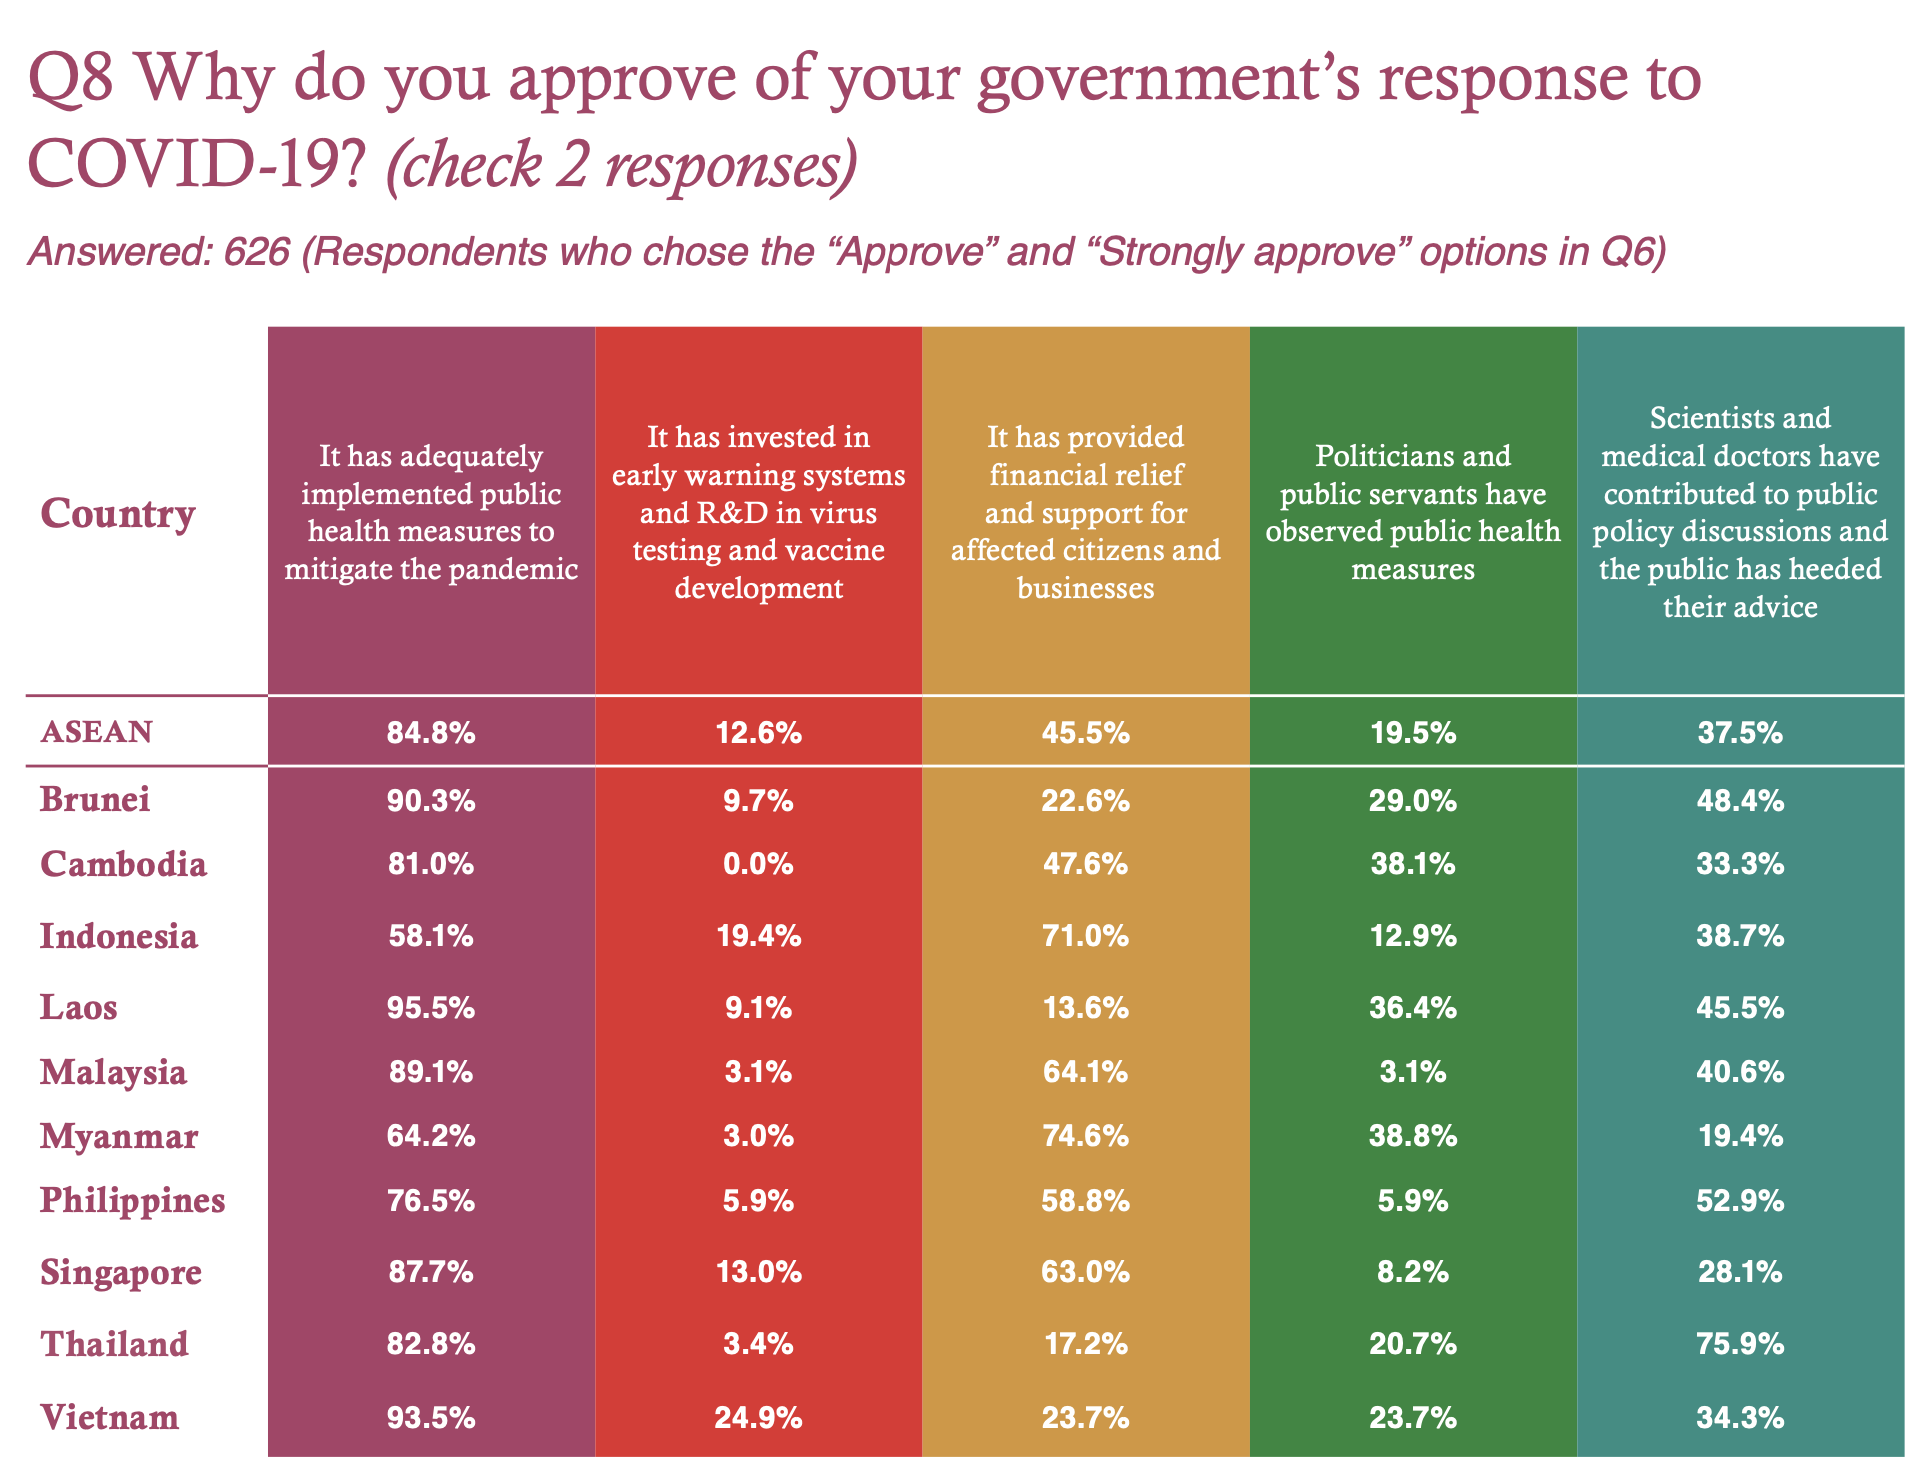 Iseas survey: malaysia ranked 4th in approval ratings for gov't response to covid | weirdkaya